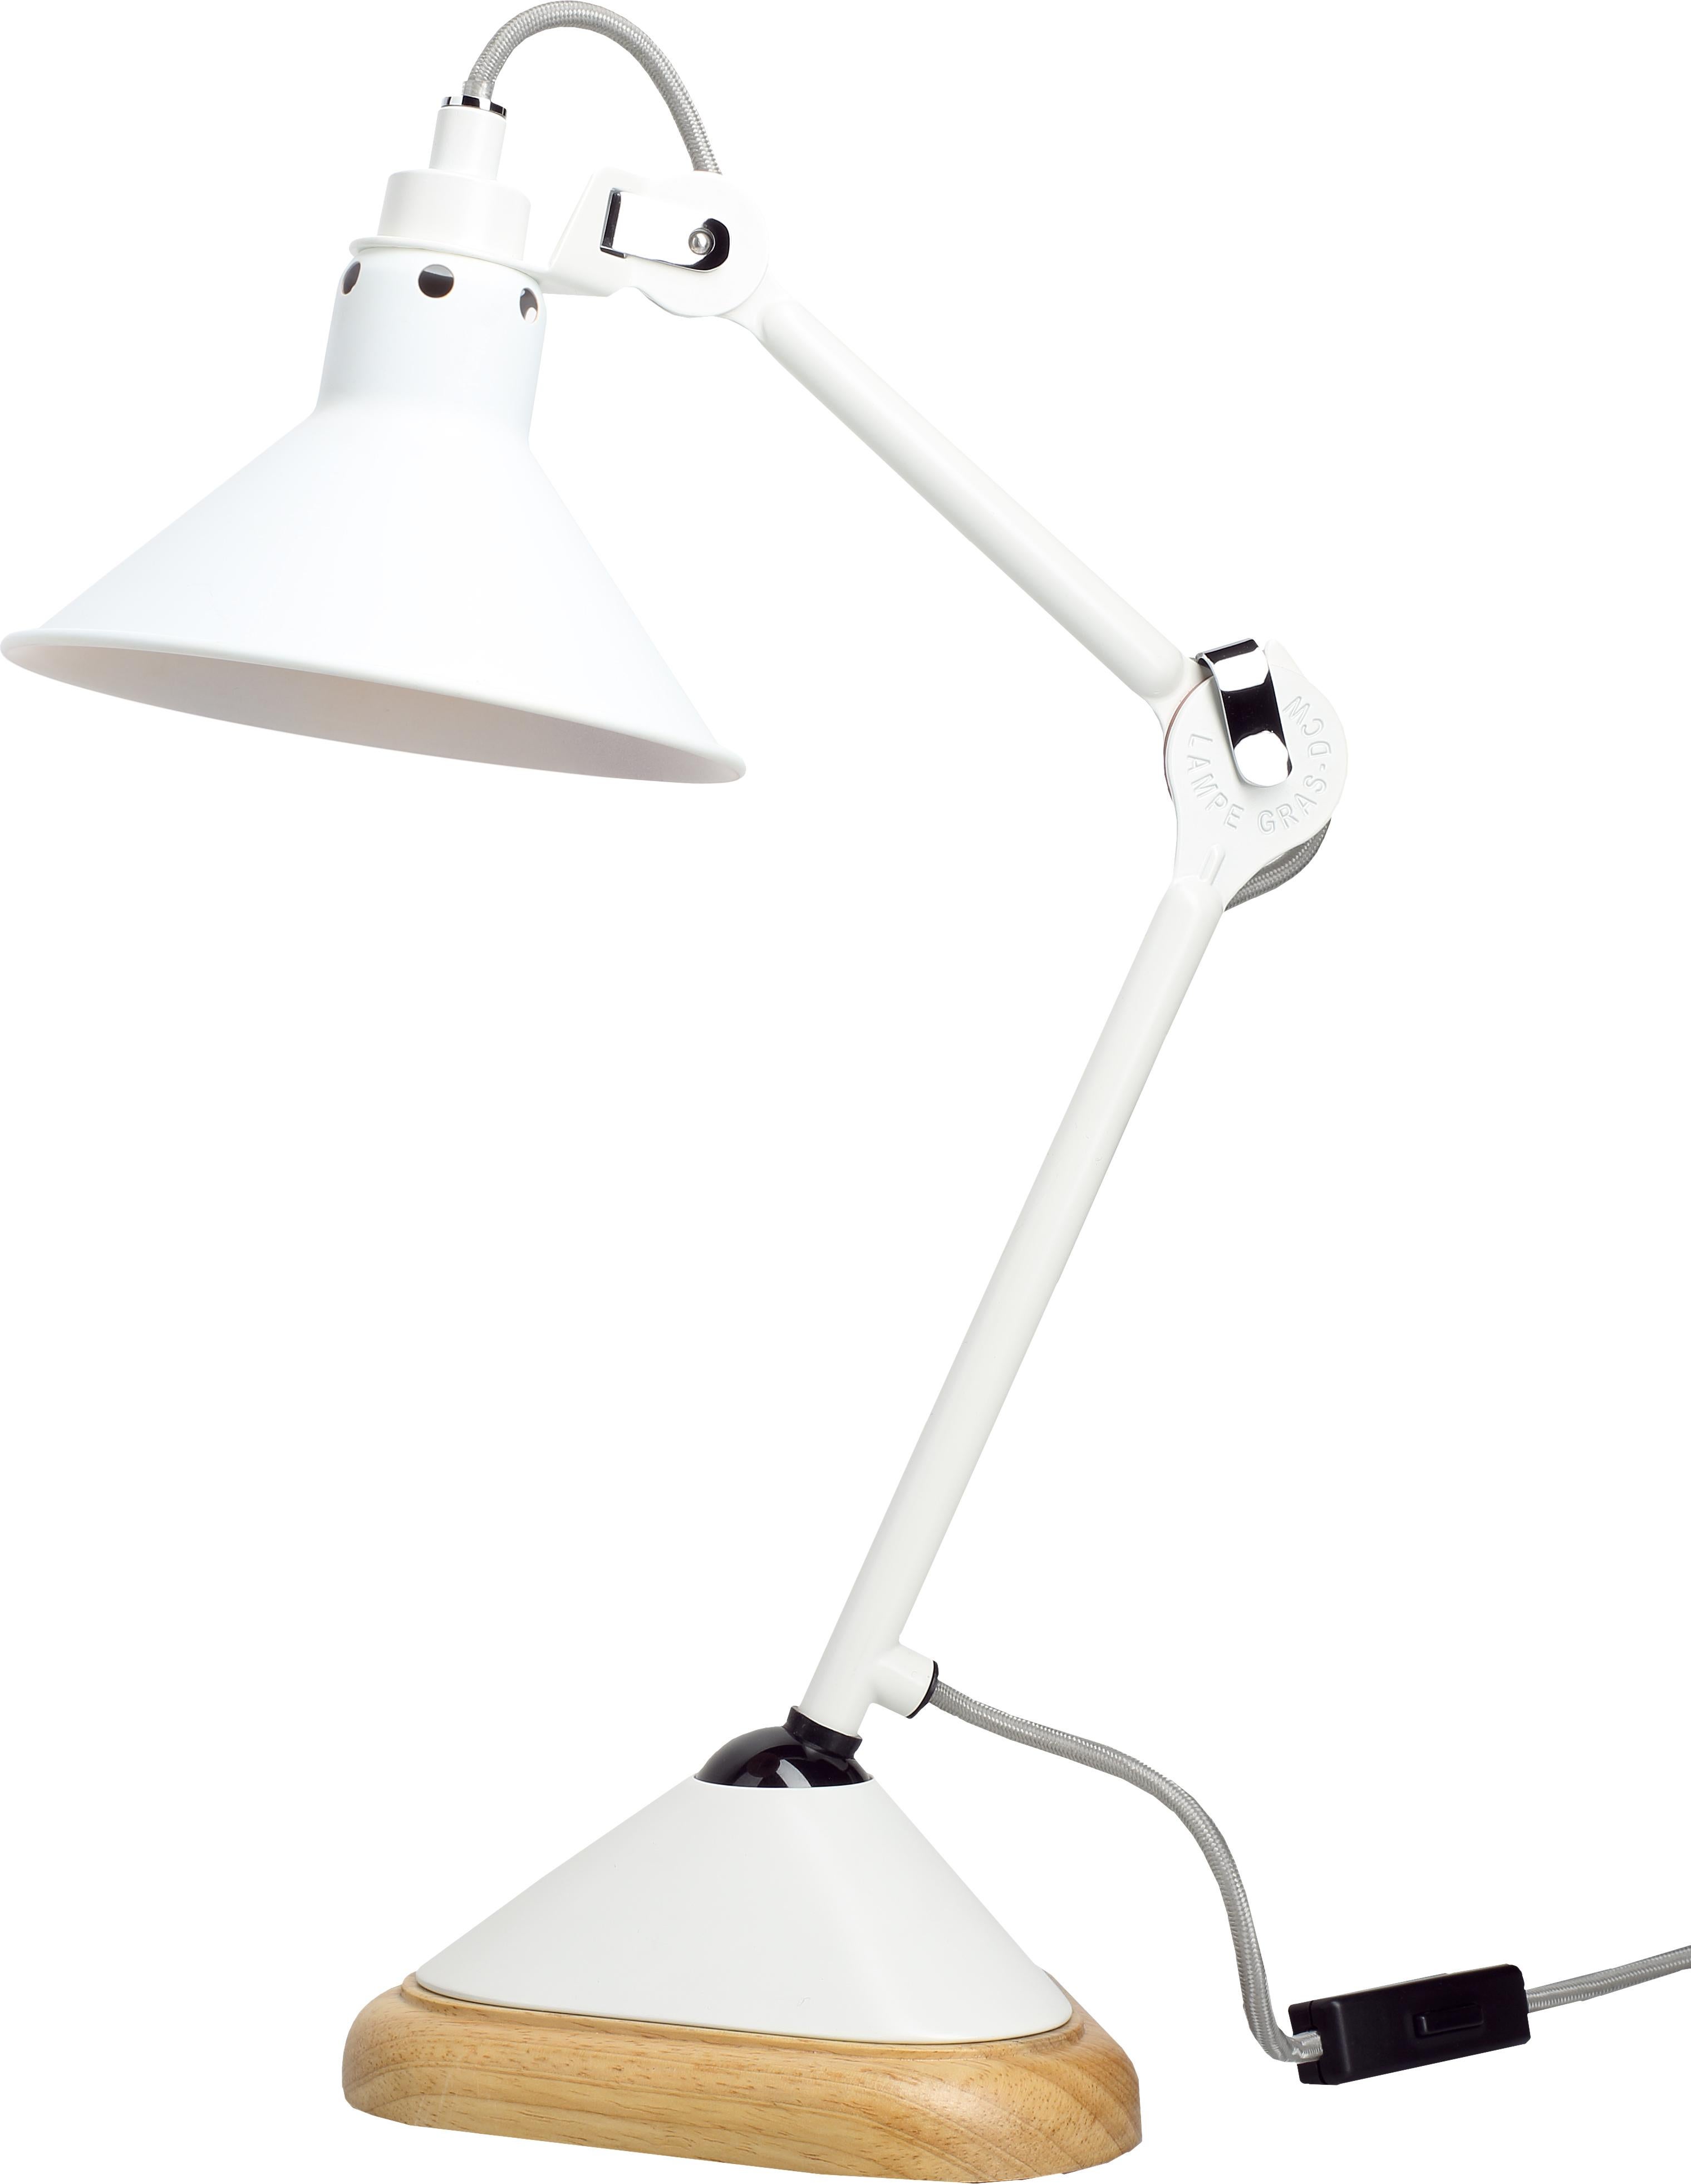 DCW Editions La Lampe Gras N°207 Conic Table Lamp in White Arm with White Shade For Sale